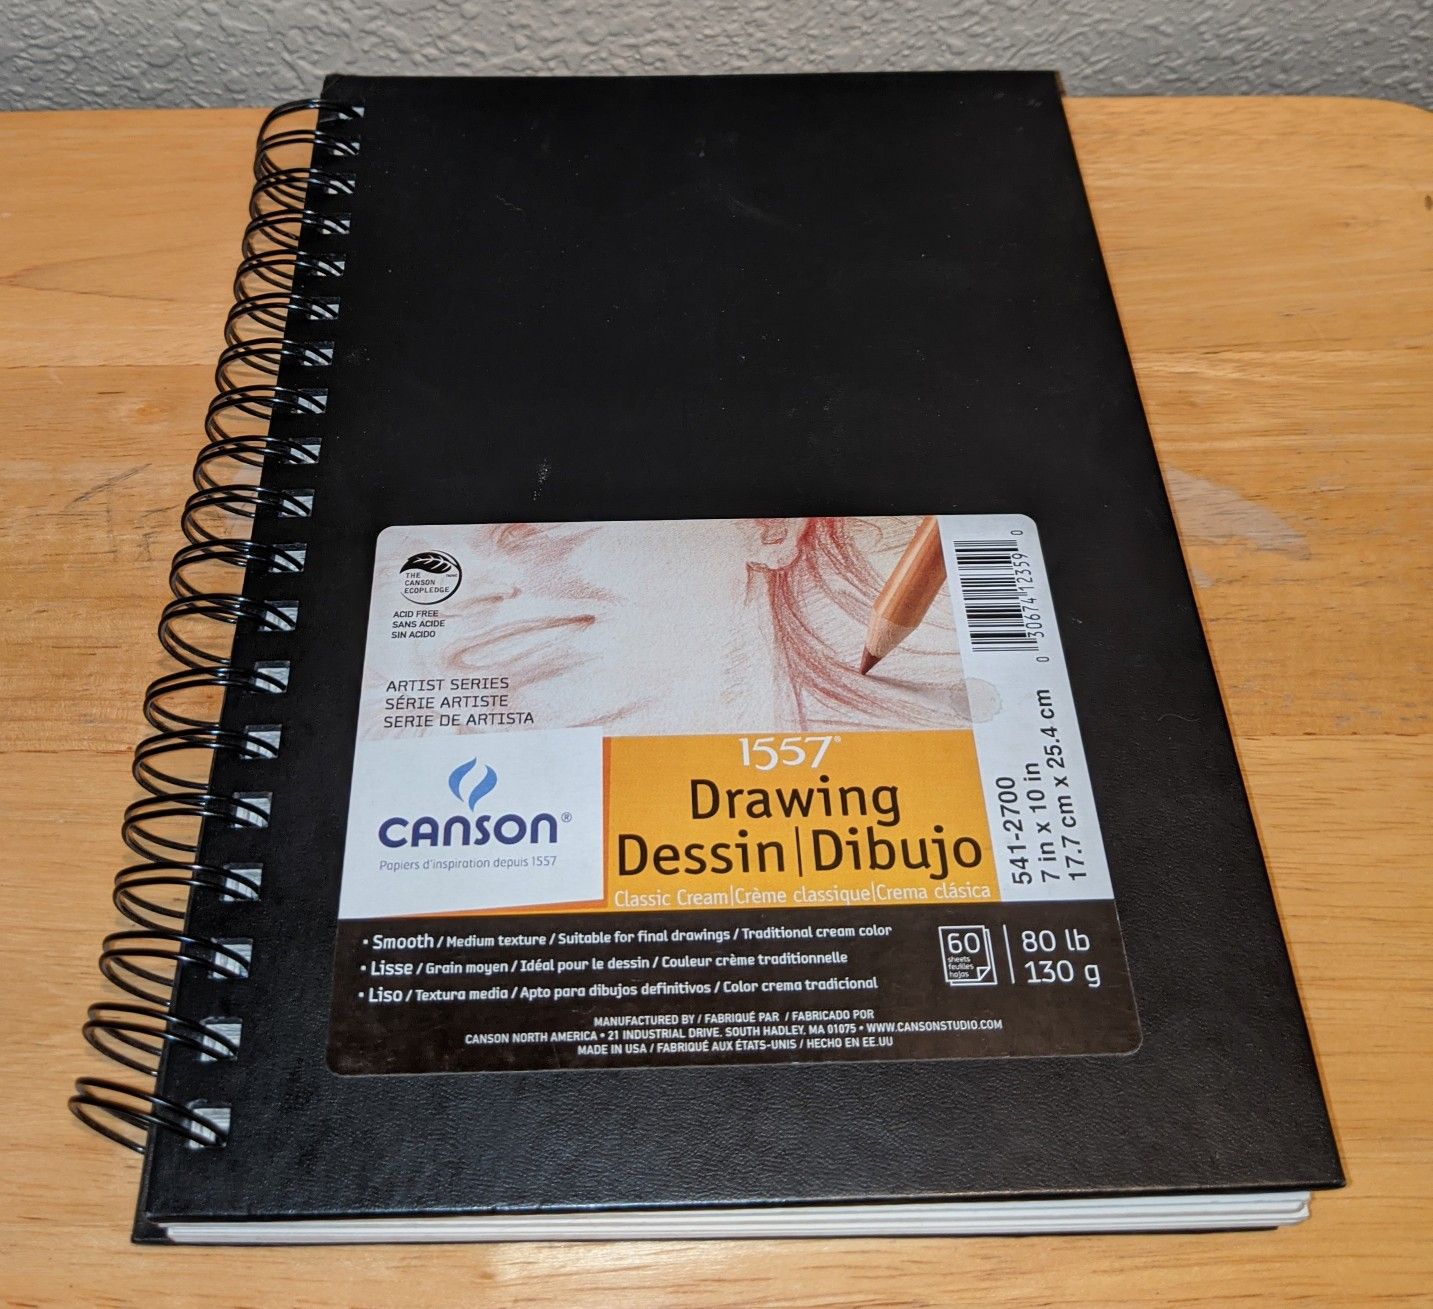 Canson Drawing book 7" x 10", 60 pgs., new